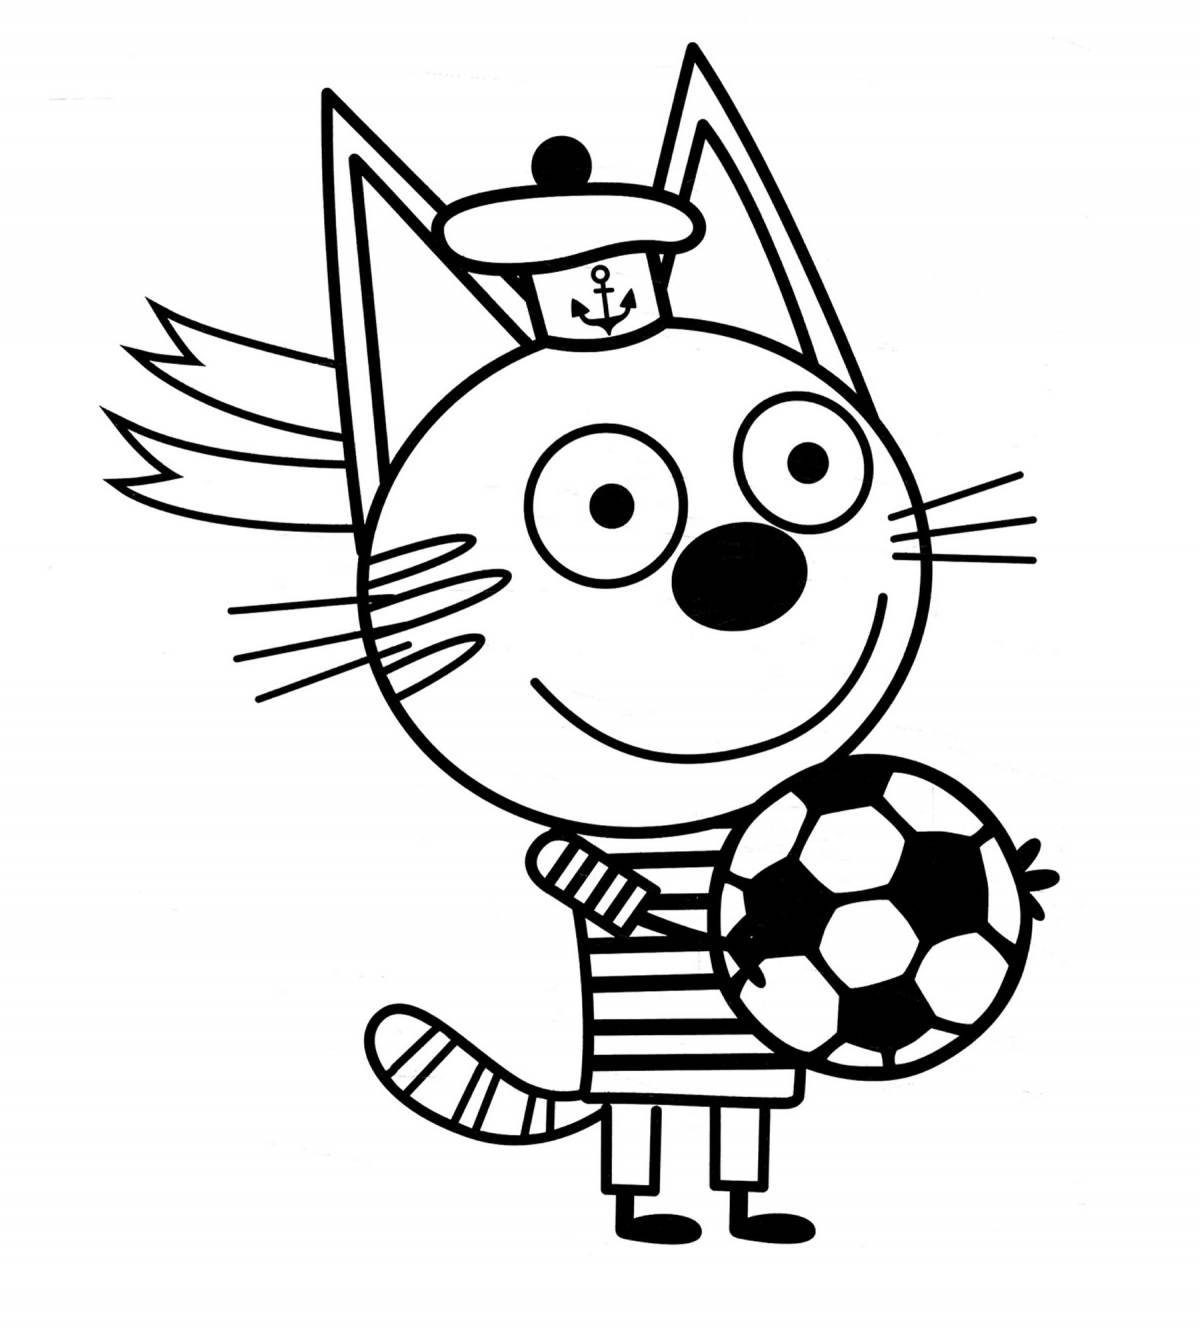 Color-frenzy 3 cats coloring pages